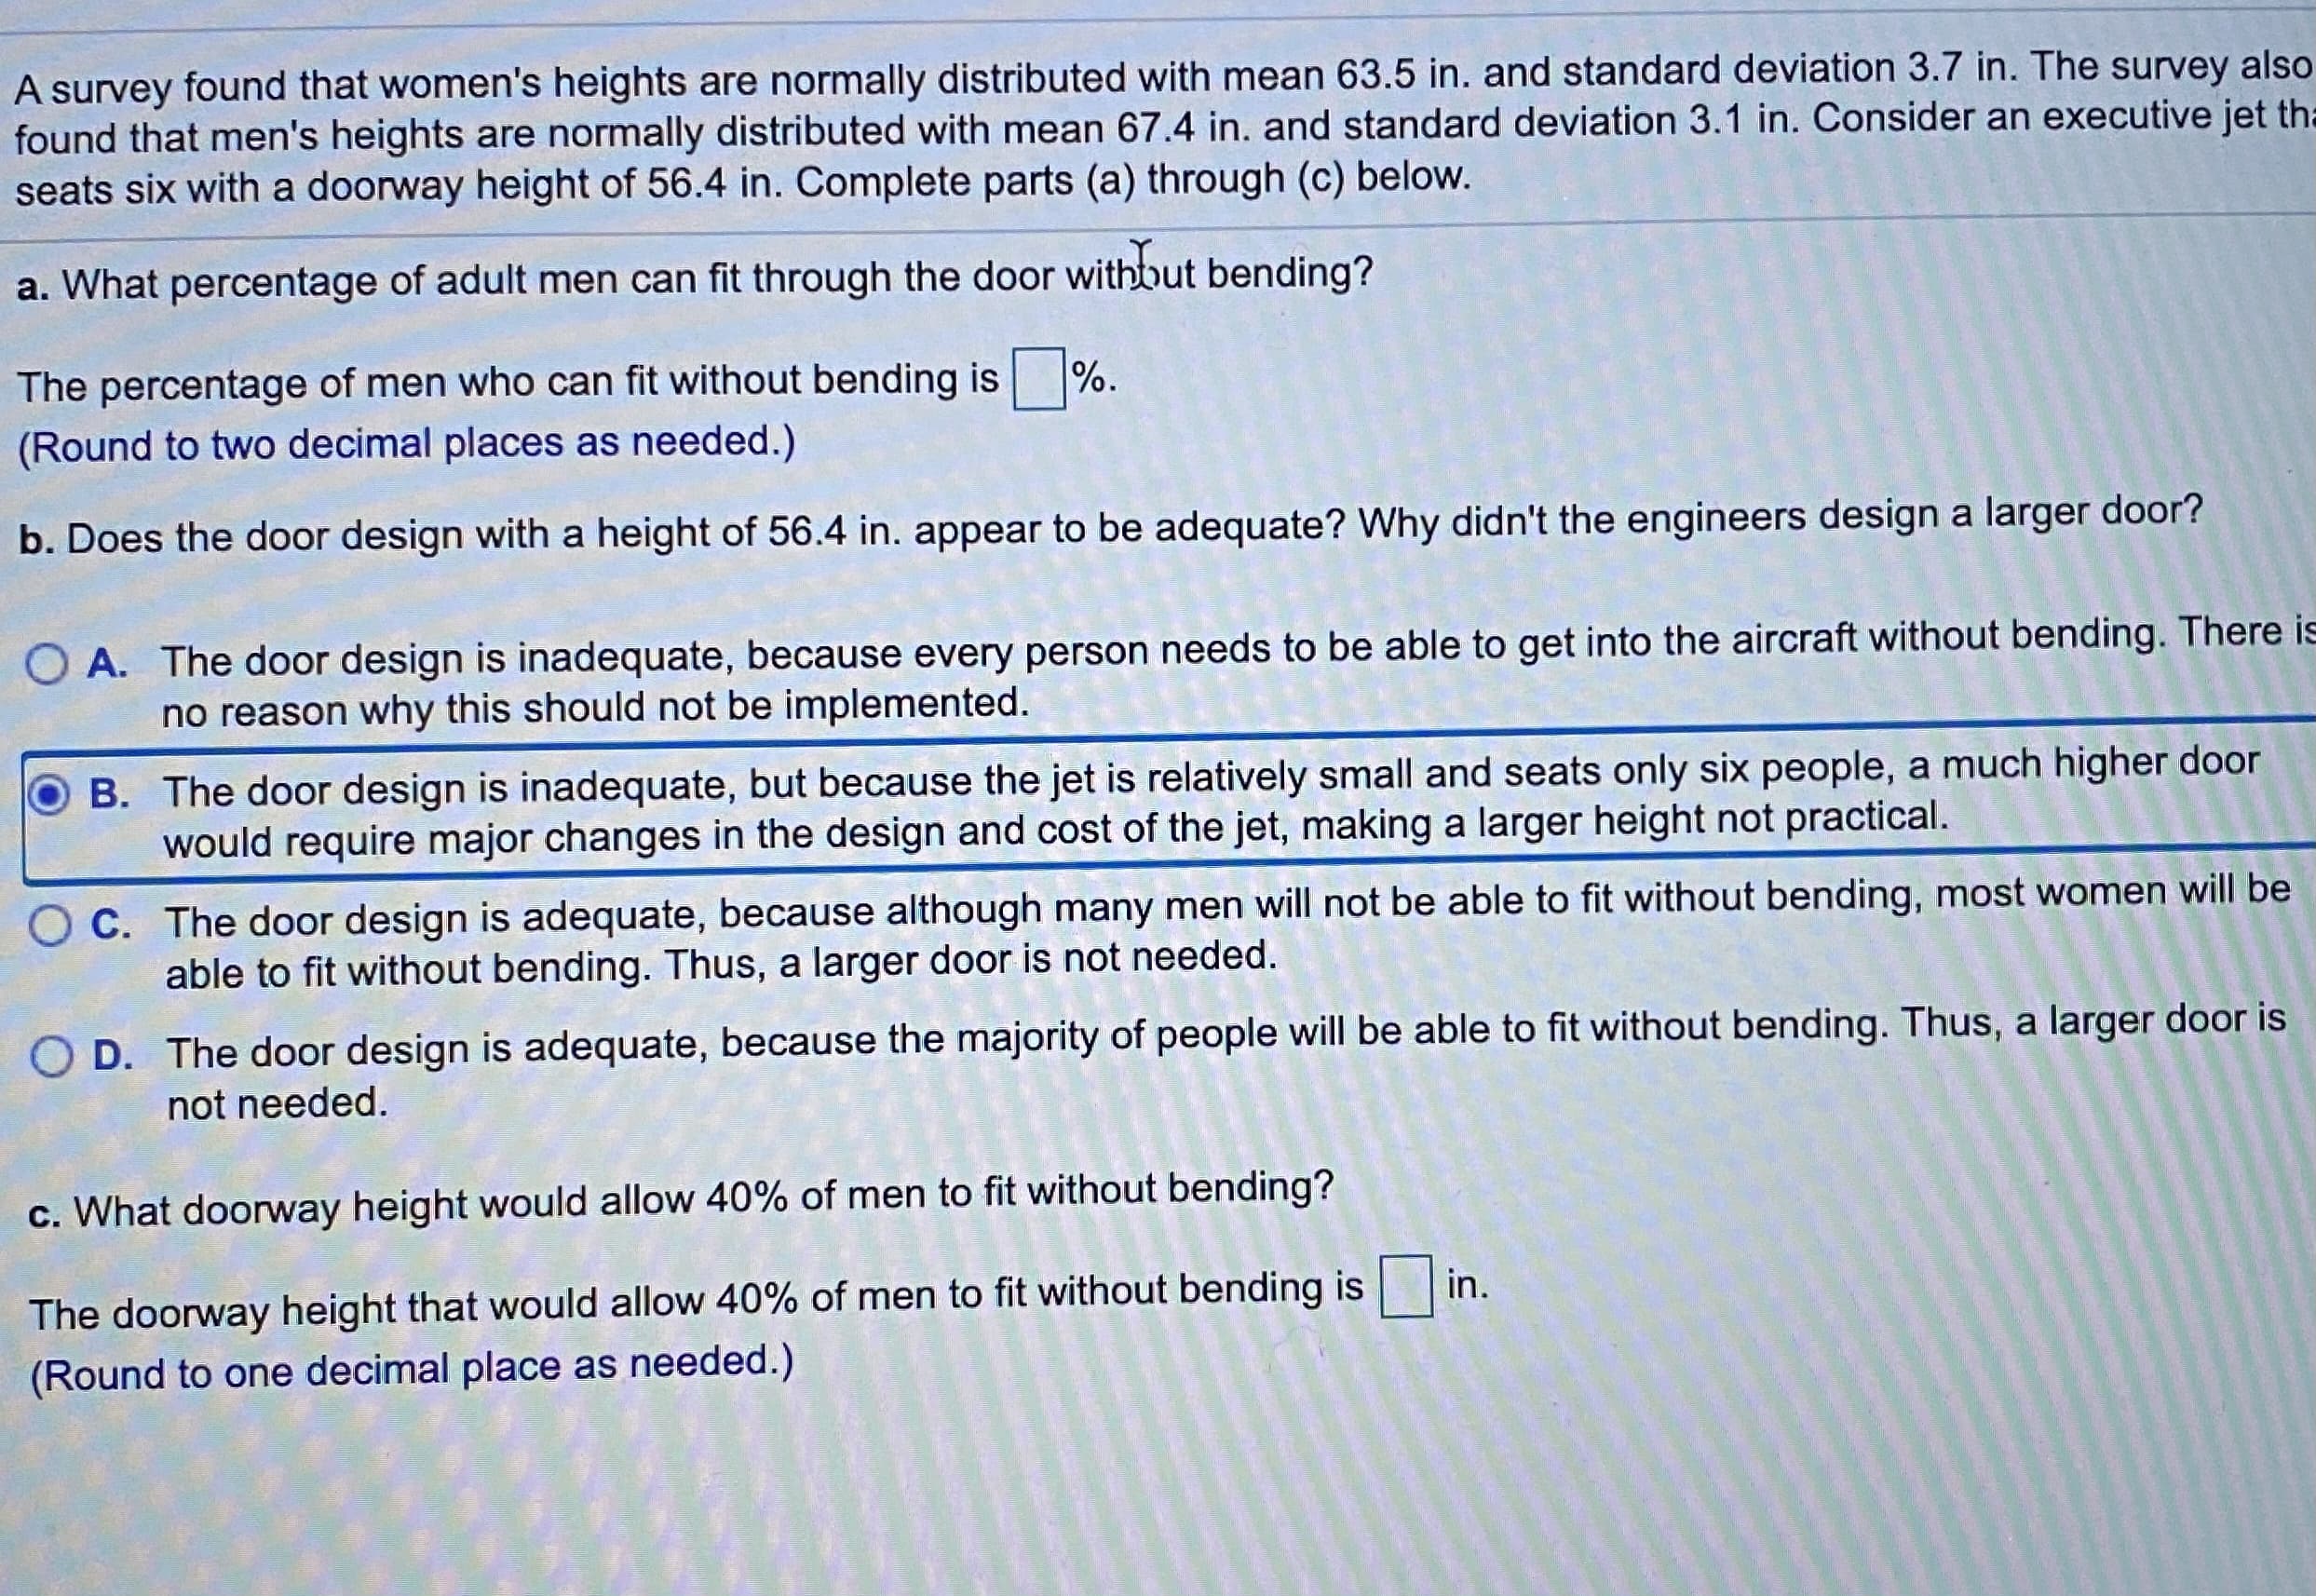 A survey found that women's heights are normally distributed with mean 63.5 in. and standard deviation 3.7 in. The survey als
found that men's heights are normally distributed with mean 67.4 in. and standard deviation 3.1 in. Consider an executive jet
seats six with a doorway height of 56.4 in. Complete parts (a) through (c) below.
a. What percentage of adult men can fit through the door withbut bending?
The percentage of men who can fit without bending is %.
(Round to two decimal places as needed.)
b. Does the door design with a height of 56.4 in. appear to be adequate? Why didn't the engineers design a larger door?
O A. The door design is inadequate, because every person needs to be able to get into the aircraft without bending. There
no reason why this should not be implemented.
B. The door design is inadequate, but because the jet is relatively small and seats only six people, a much higher door
would require major changes in the design and cost of the jet, making a larger height not practical.
